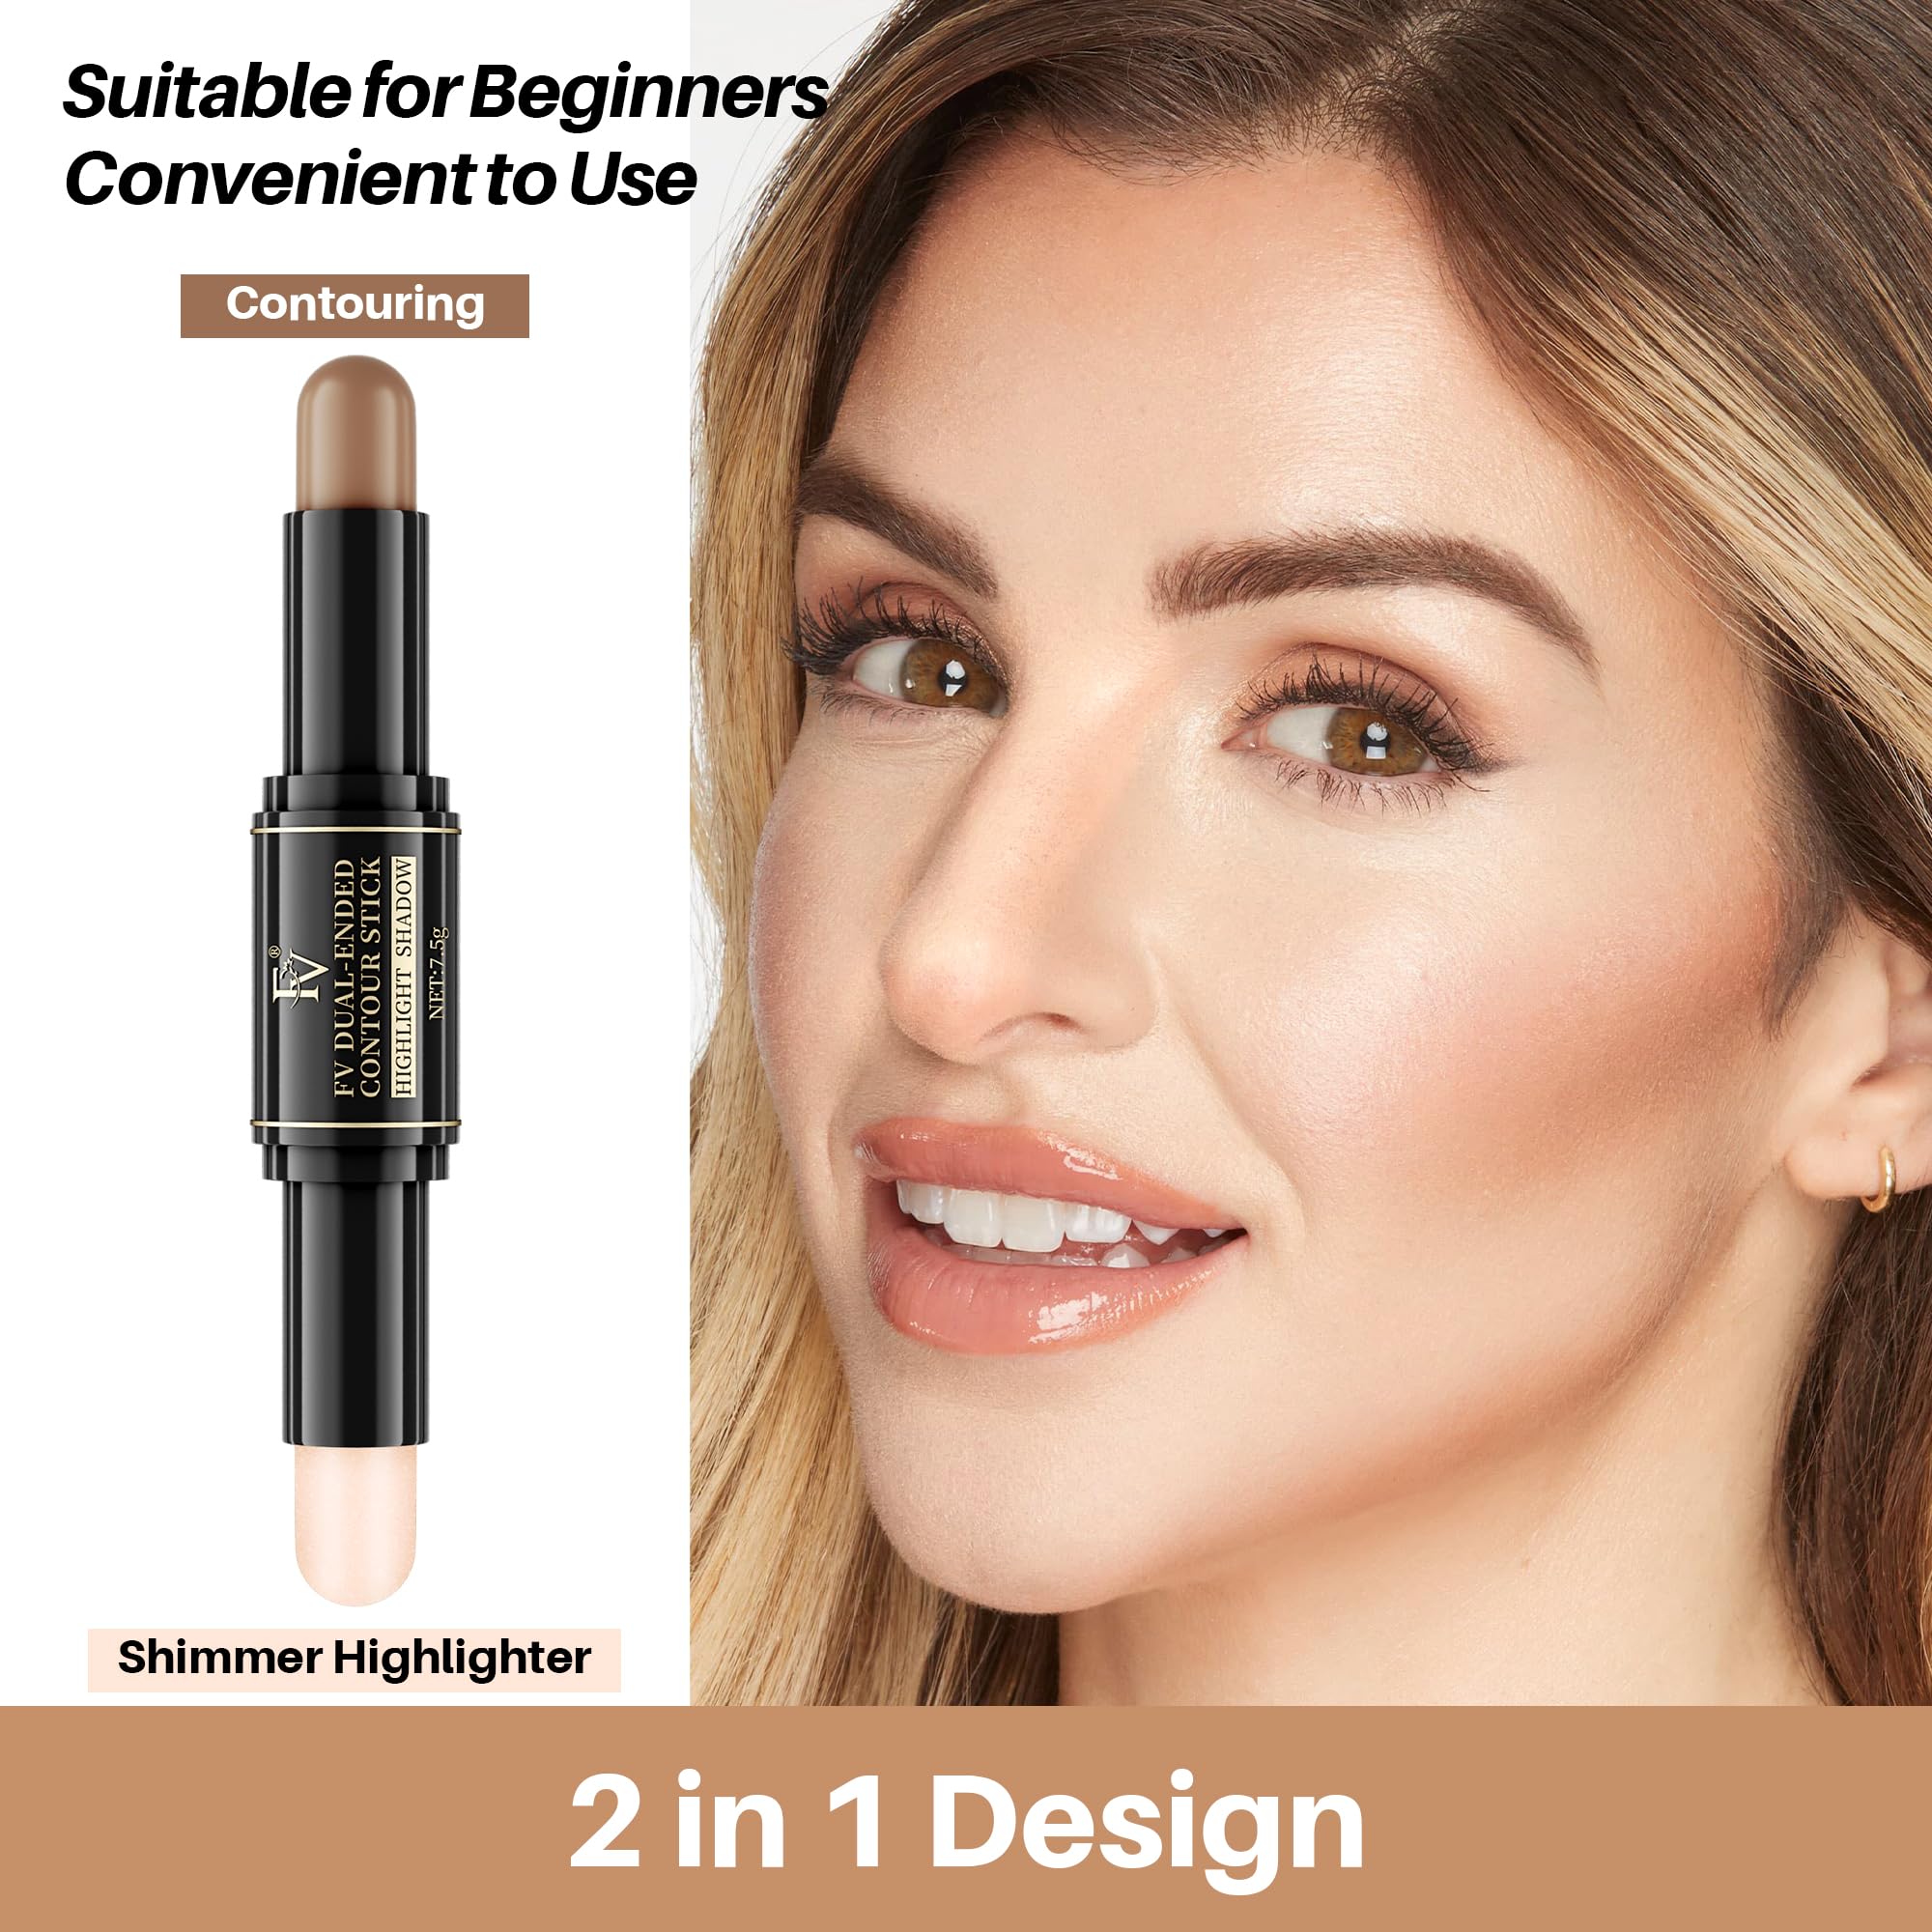 FV Cream Contour Stick, 2-in-1 Face Shaping Stick for Highlighting & Contouring, Bronzer Stick，Long Lasting & Waterproof，Non-Sticky Highlighter Makeup Pen for Light/Medium Skin Tones, 0.26oz (7.5g)